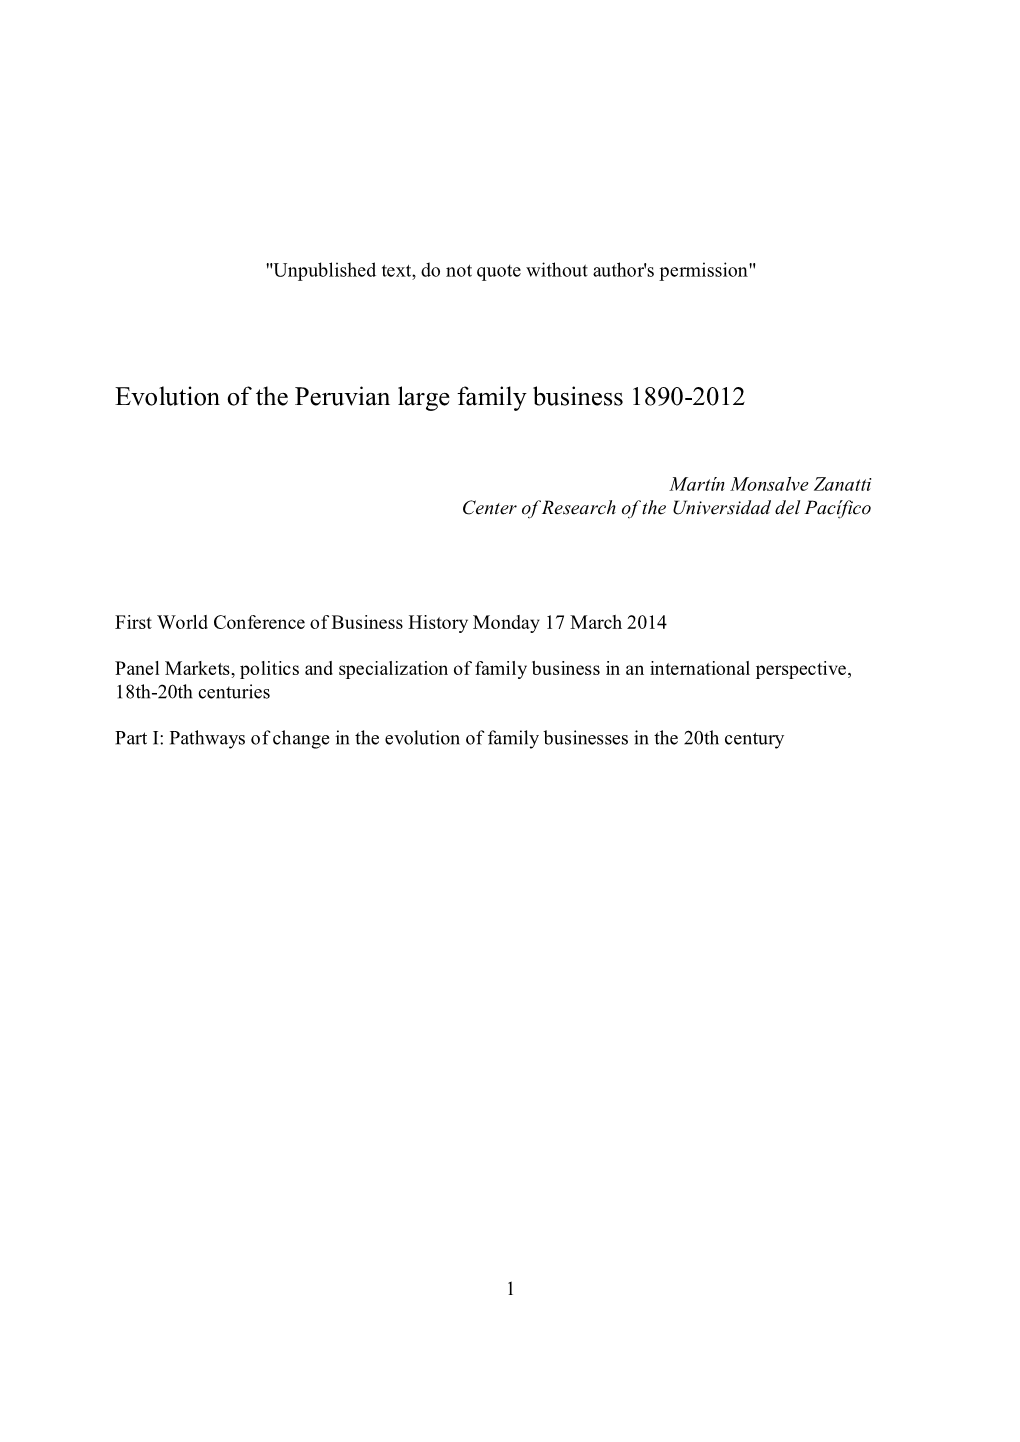 Evolution of the Peruvian Large Family Business 1890-2012